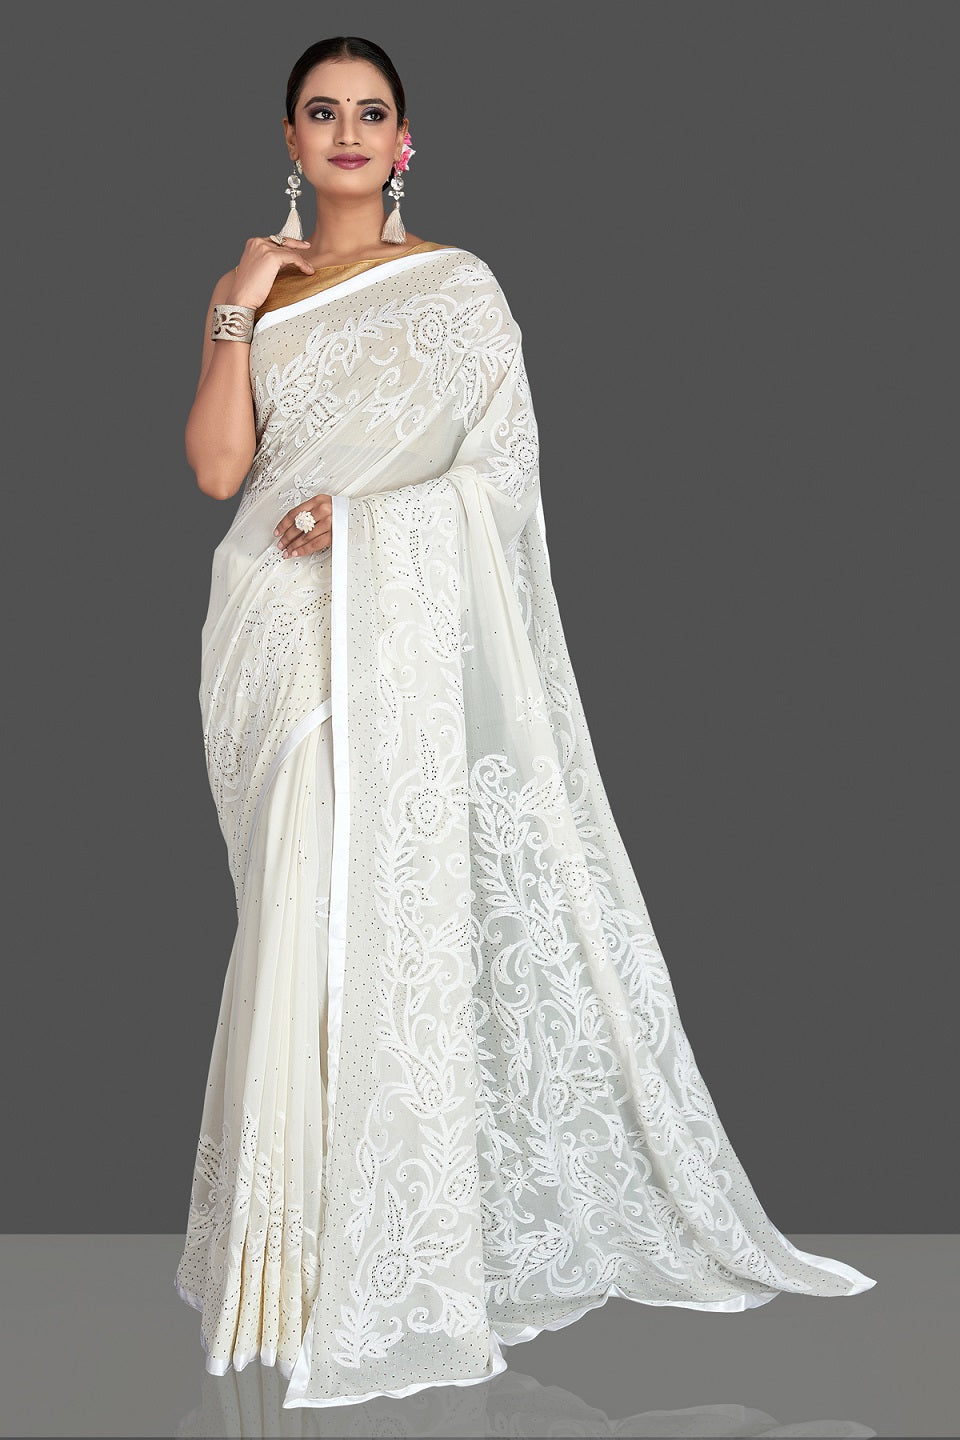 Buy stunning off-white Lucknowi chikankari georgette saree online in USA. Flaunt your sartorial choice with beautiful embroidered sarees, handwoven saris, georgette sarees, pure silk sarees from Pure Elegance Indian saree store in USA.-front